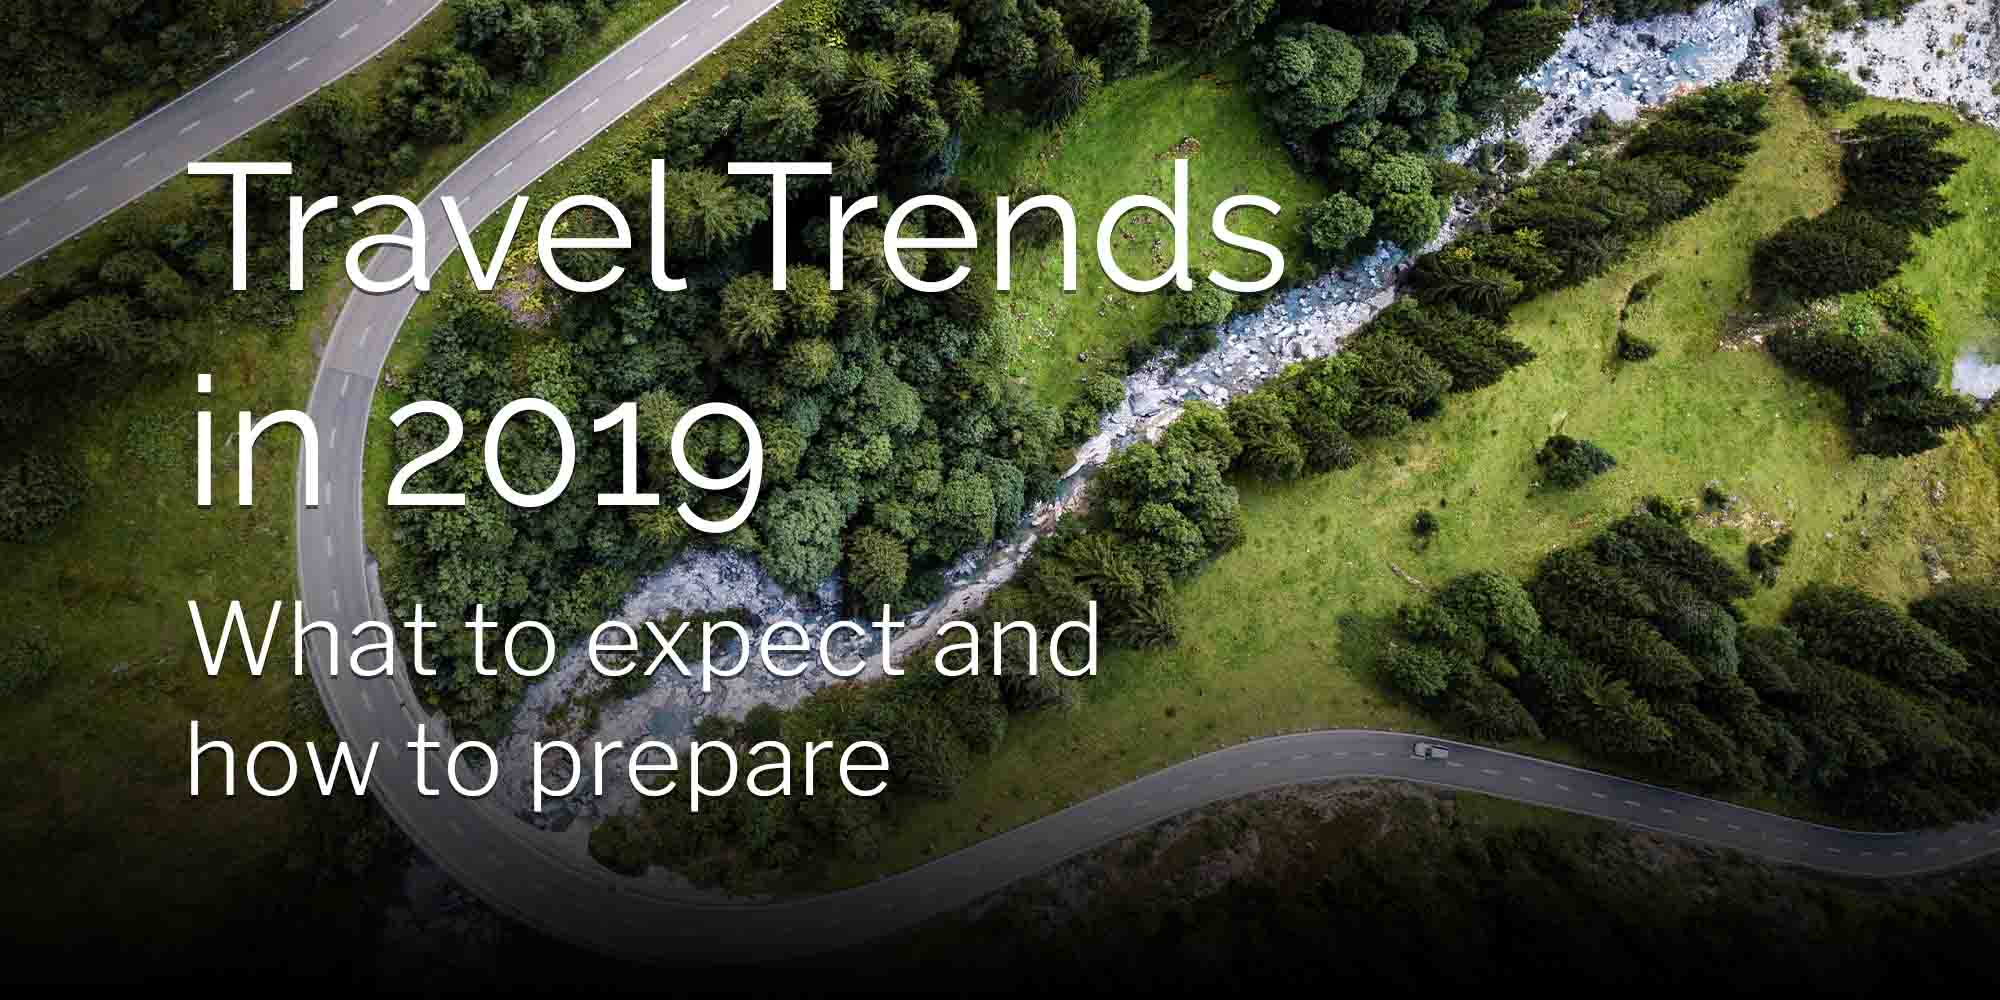 Travel trends in 2019: What to expect and how to prepare